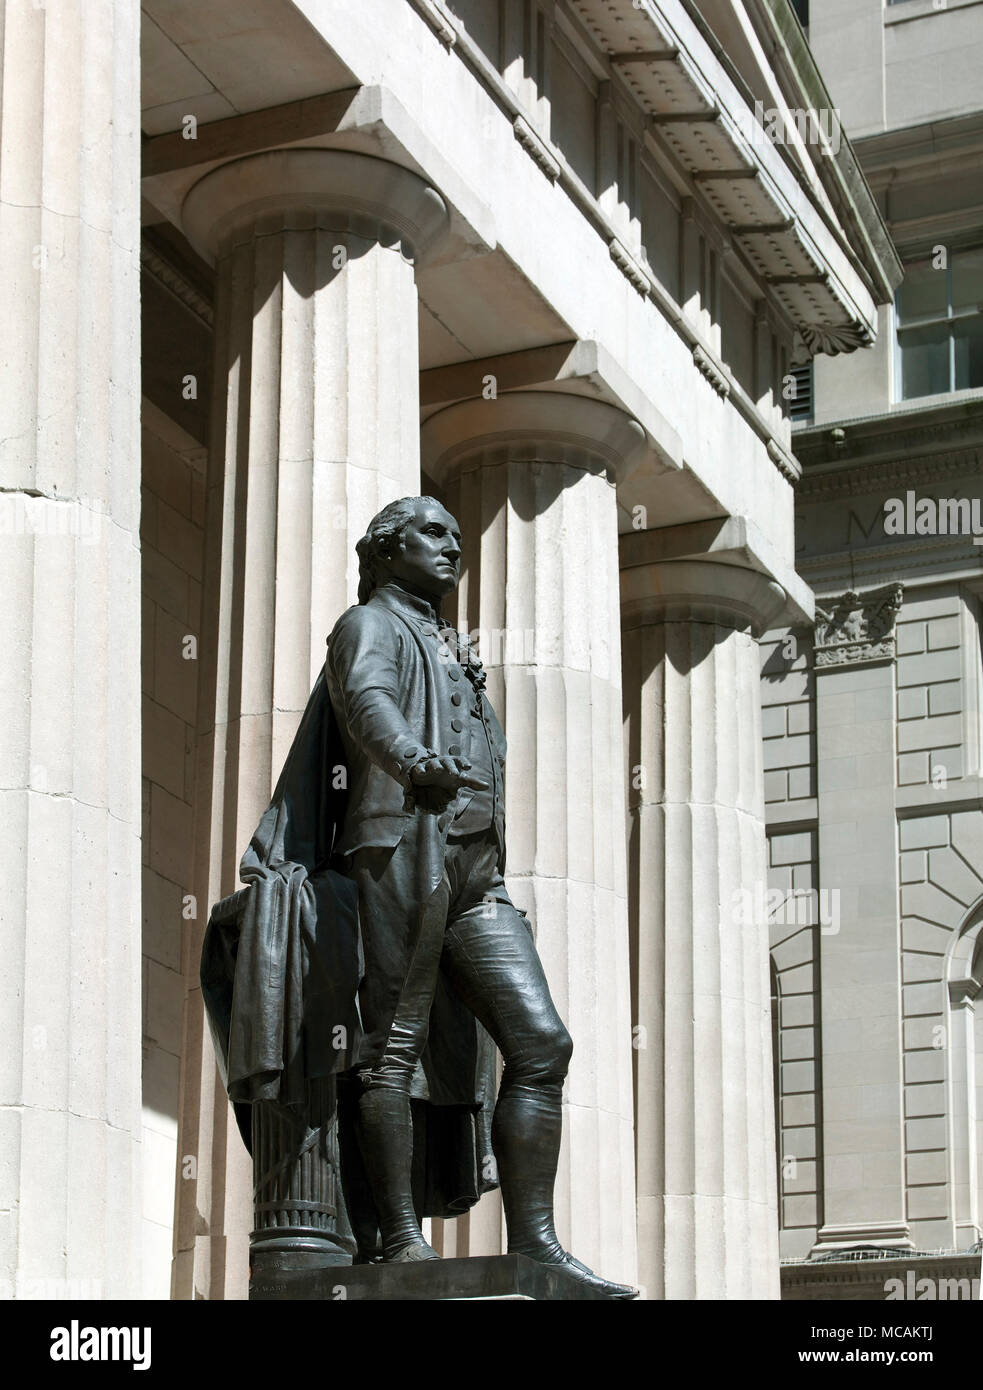 As Secretary of the Treasury, Hamilton was the primary author of the economic policies of the George Washington administration, especially the funding of the state debts by the Federal government, the establishment of a national bank, a system of tariffs, and friendly trade relations with Britain. He became the leader of the Federalist Party, created largely in support of his views, and was opposed by the Democratic-Republican Party, led by Thomas Jefferson and James Madison. Stock Photo